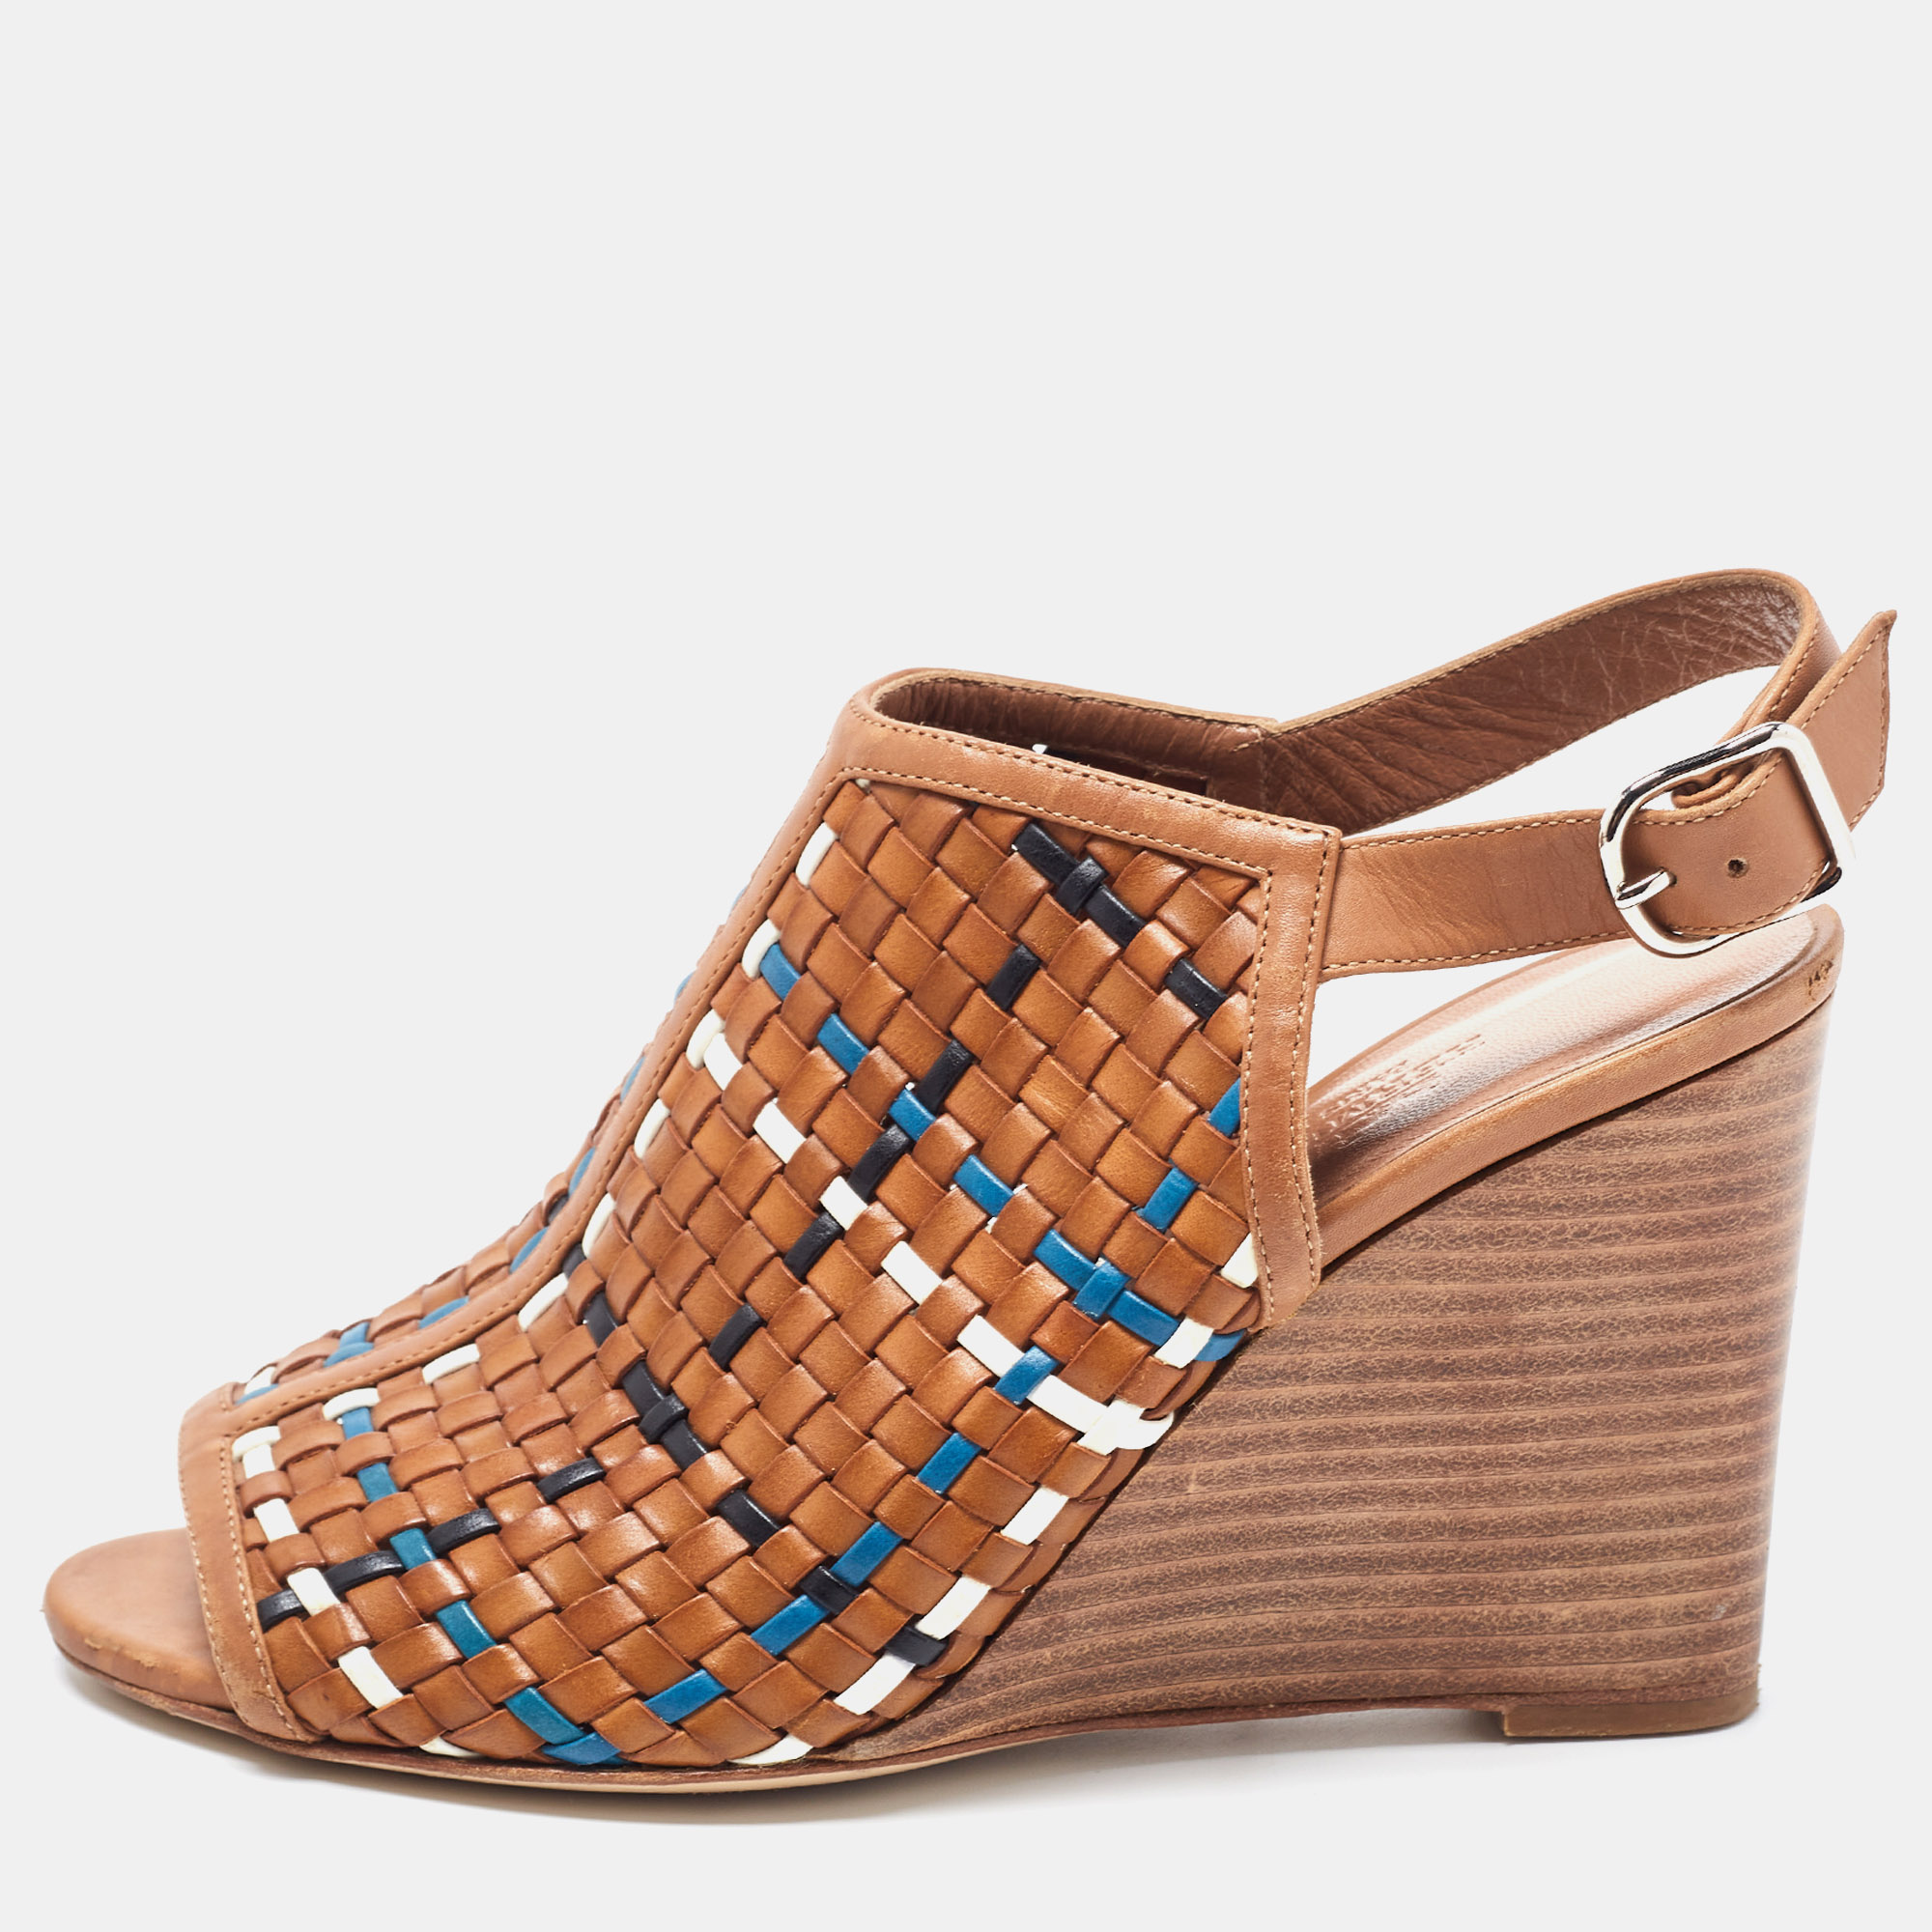 

Hermes Tricolor Woven Leather Peep Toe Wedge Slingback Sandals Size, Brown